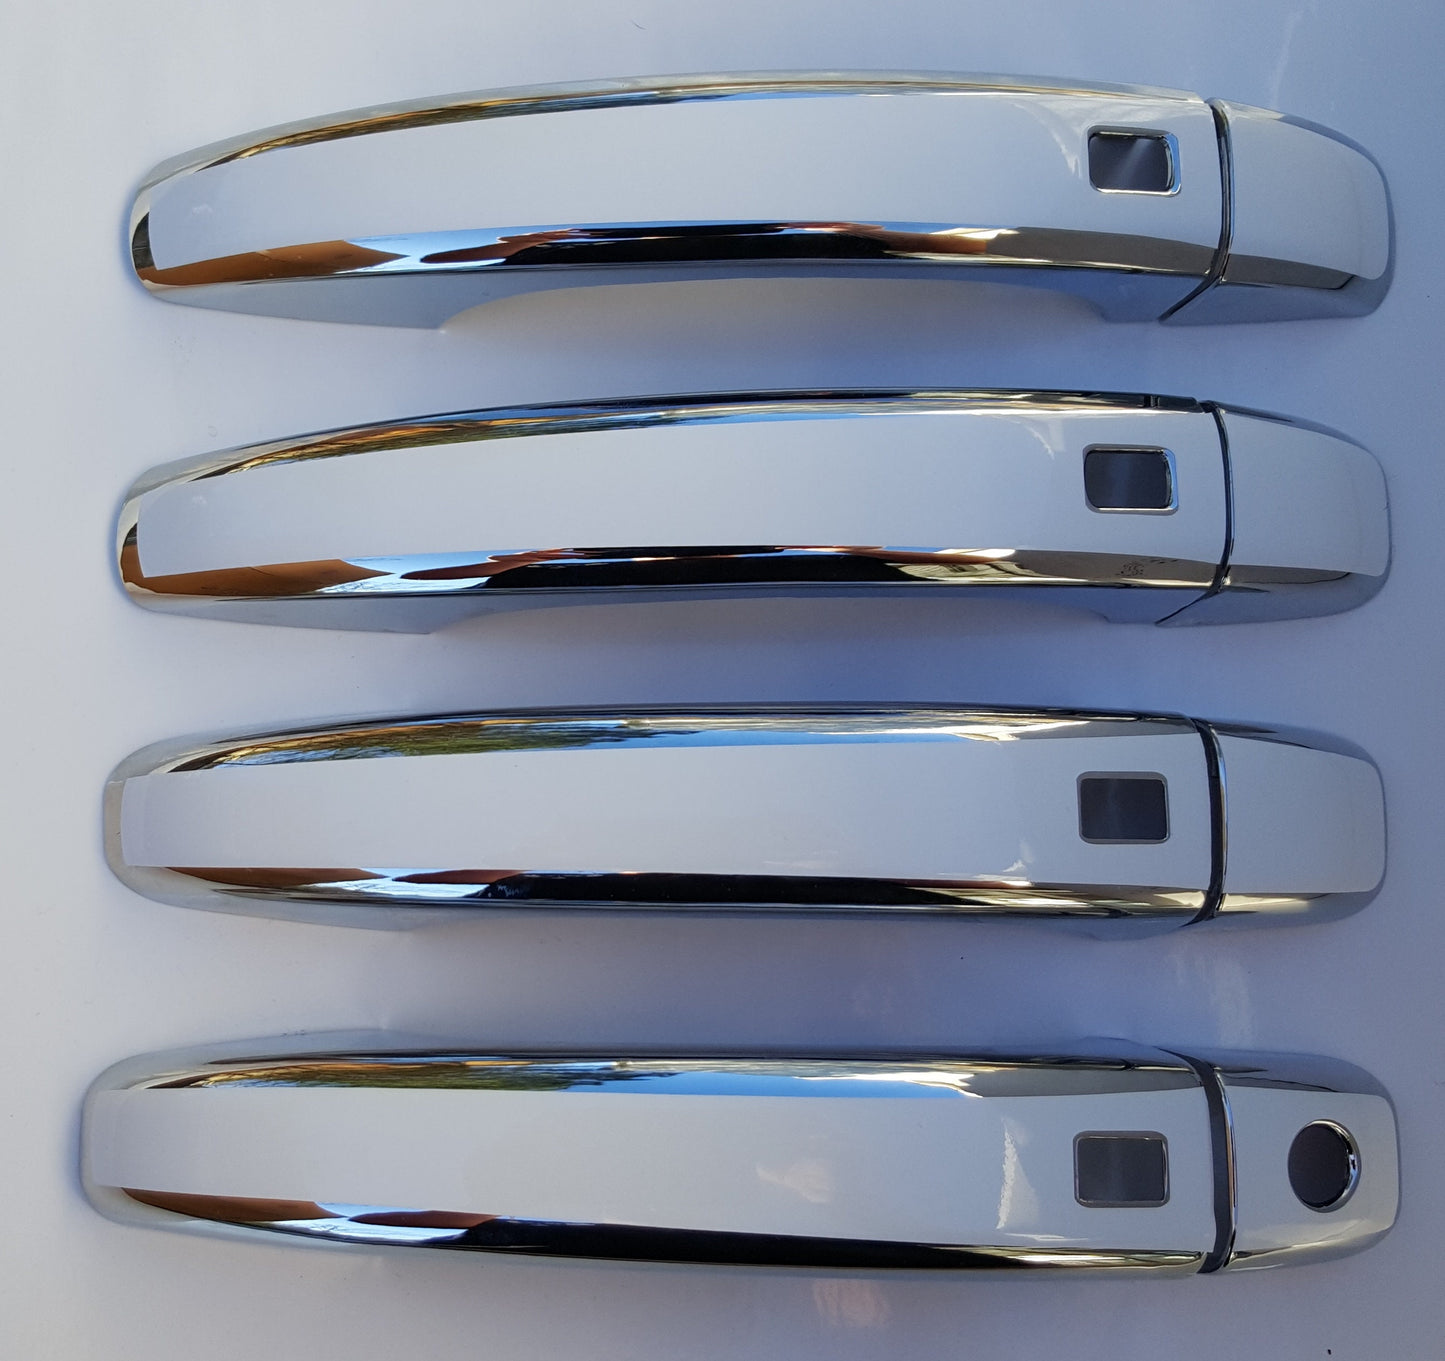 Full Set of Custom Chrome Door Handle Overlays / Covers For the 2009 – 2014 Audi S5 -- You Choose the Middle Color Insert